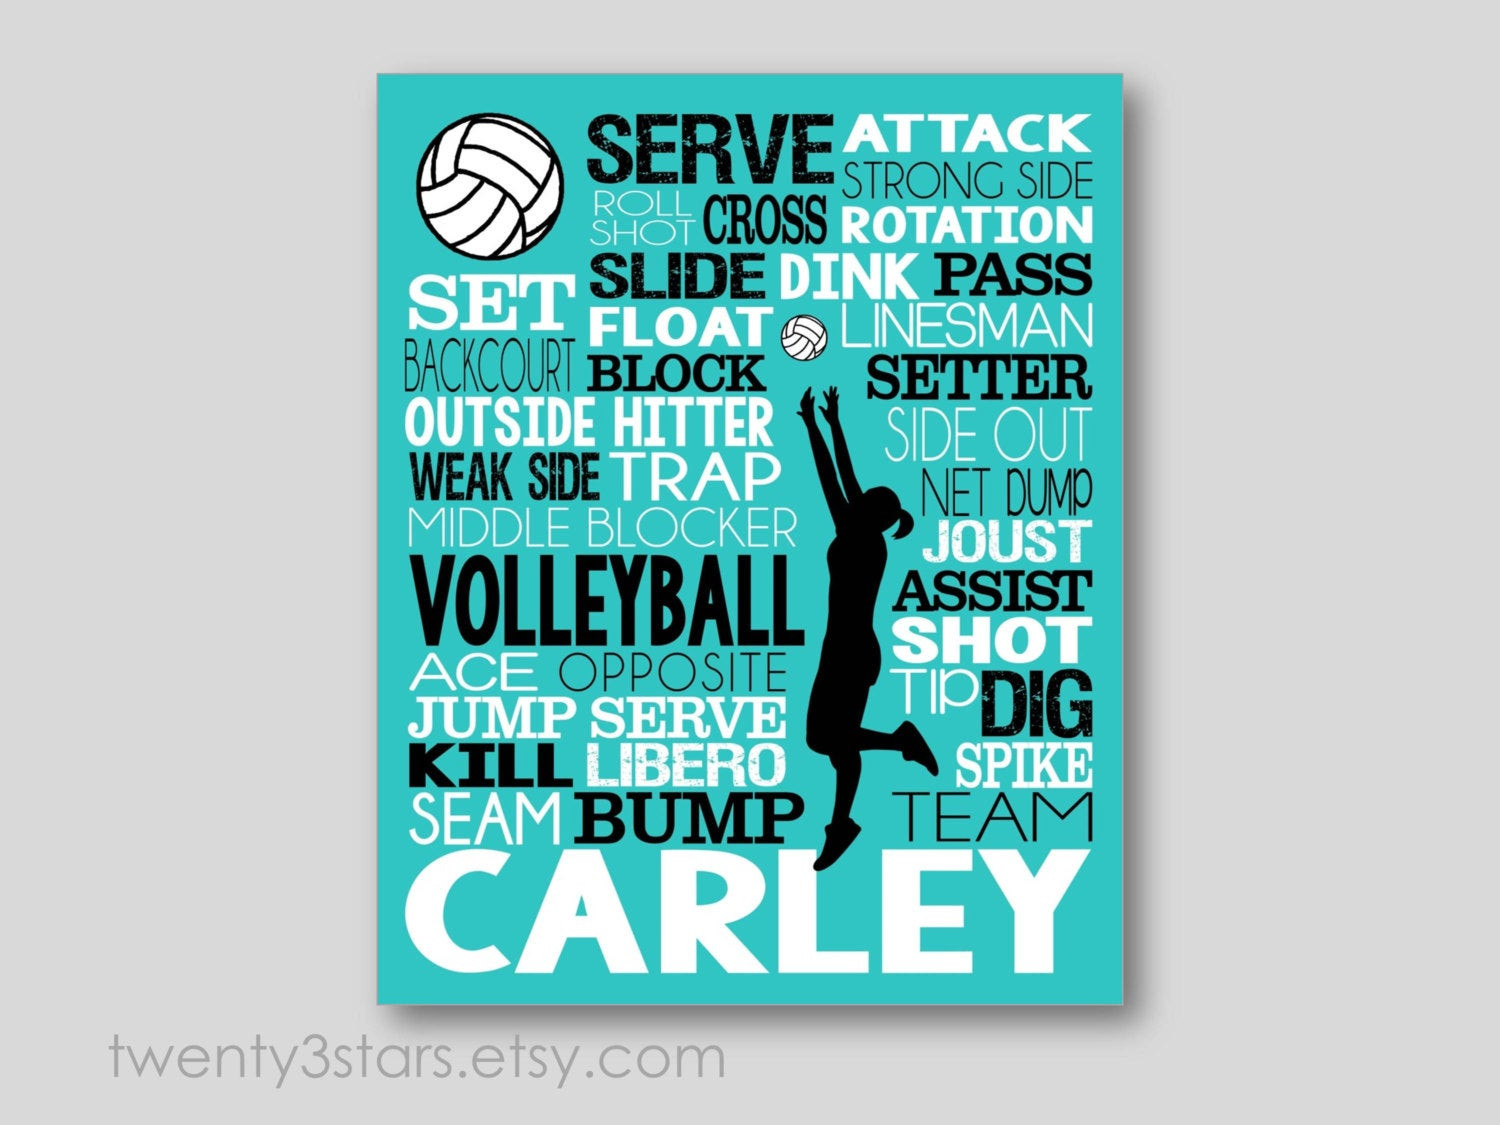 Funny Volleyball Quotes
 Volleyball Coach Quotes QuotesGram